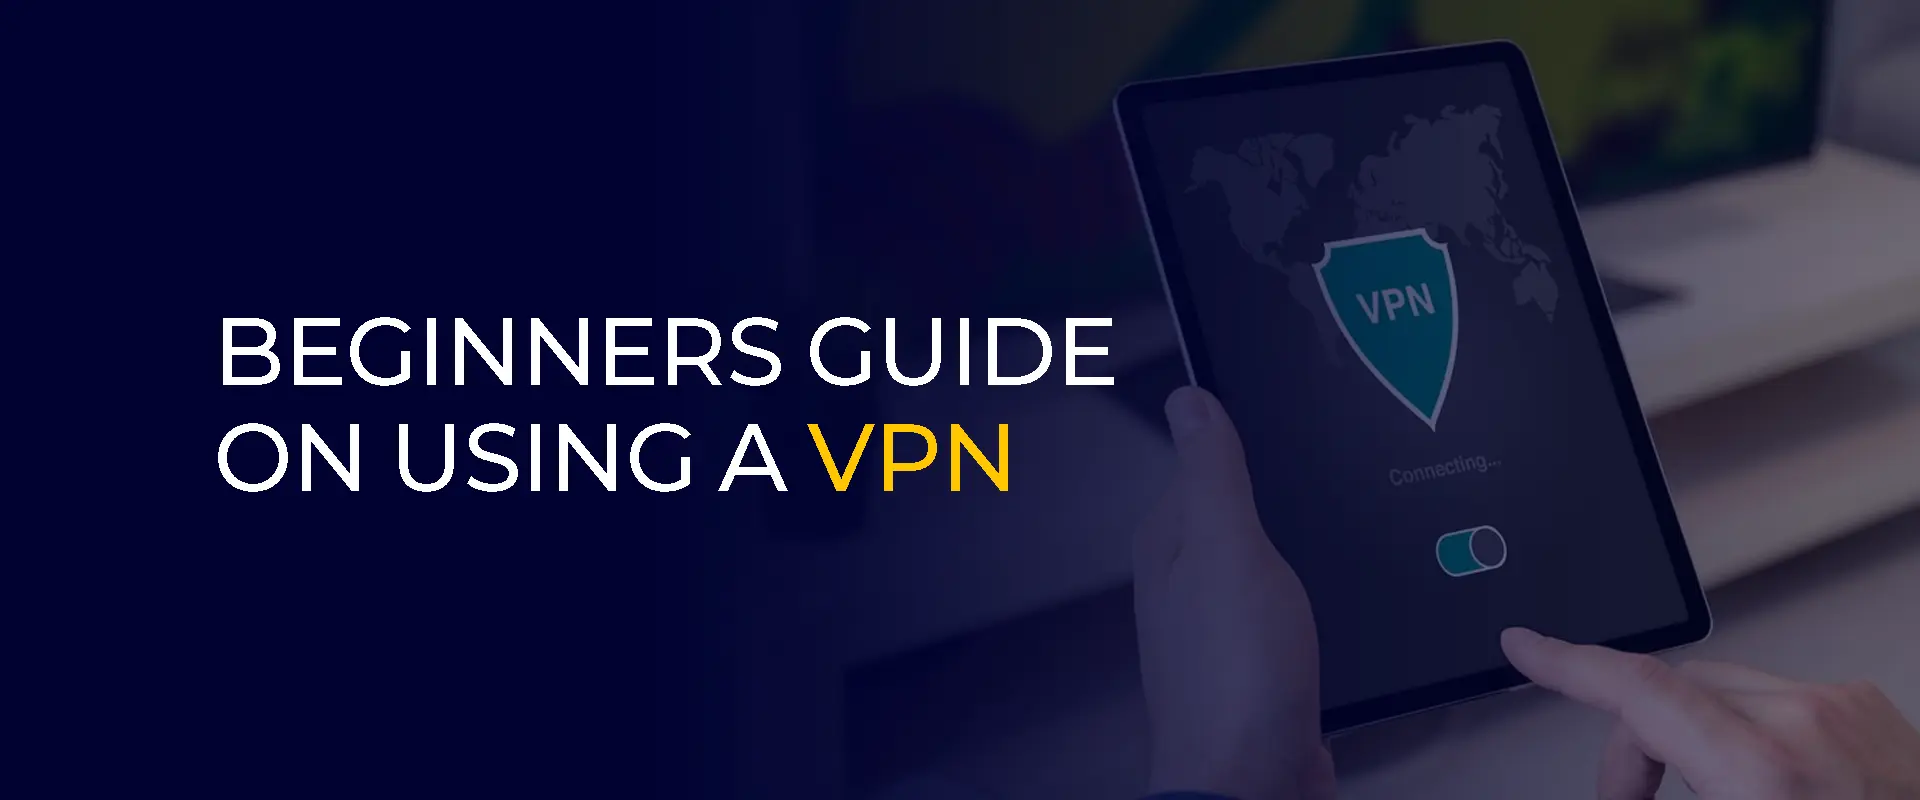 Beginners Guide on Using a VPN